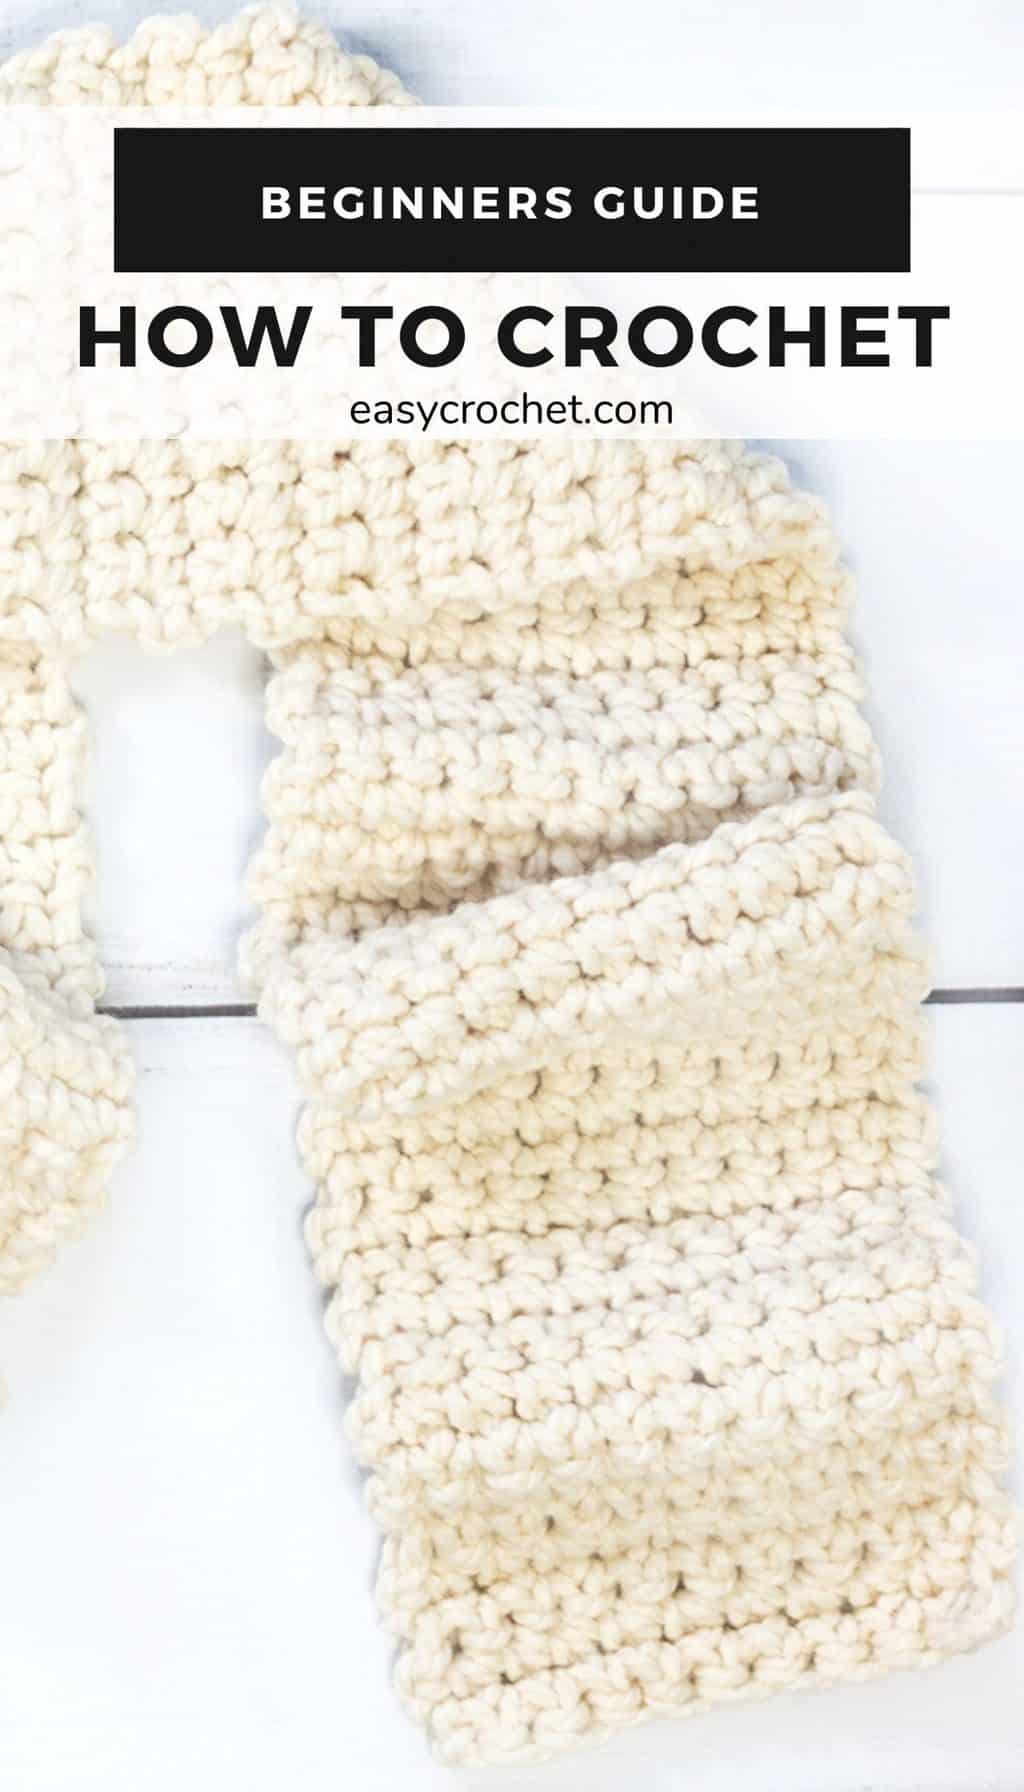 Learn how to crochet with our beginner guide! Explains everything you need to know to start crocheting today! Find complete guide at Easycrochet.com via @easycrochetcom